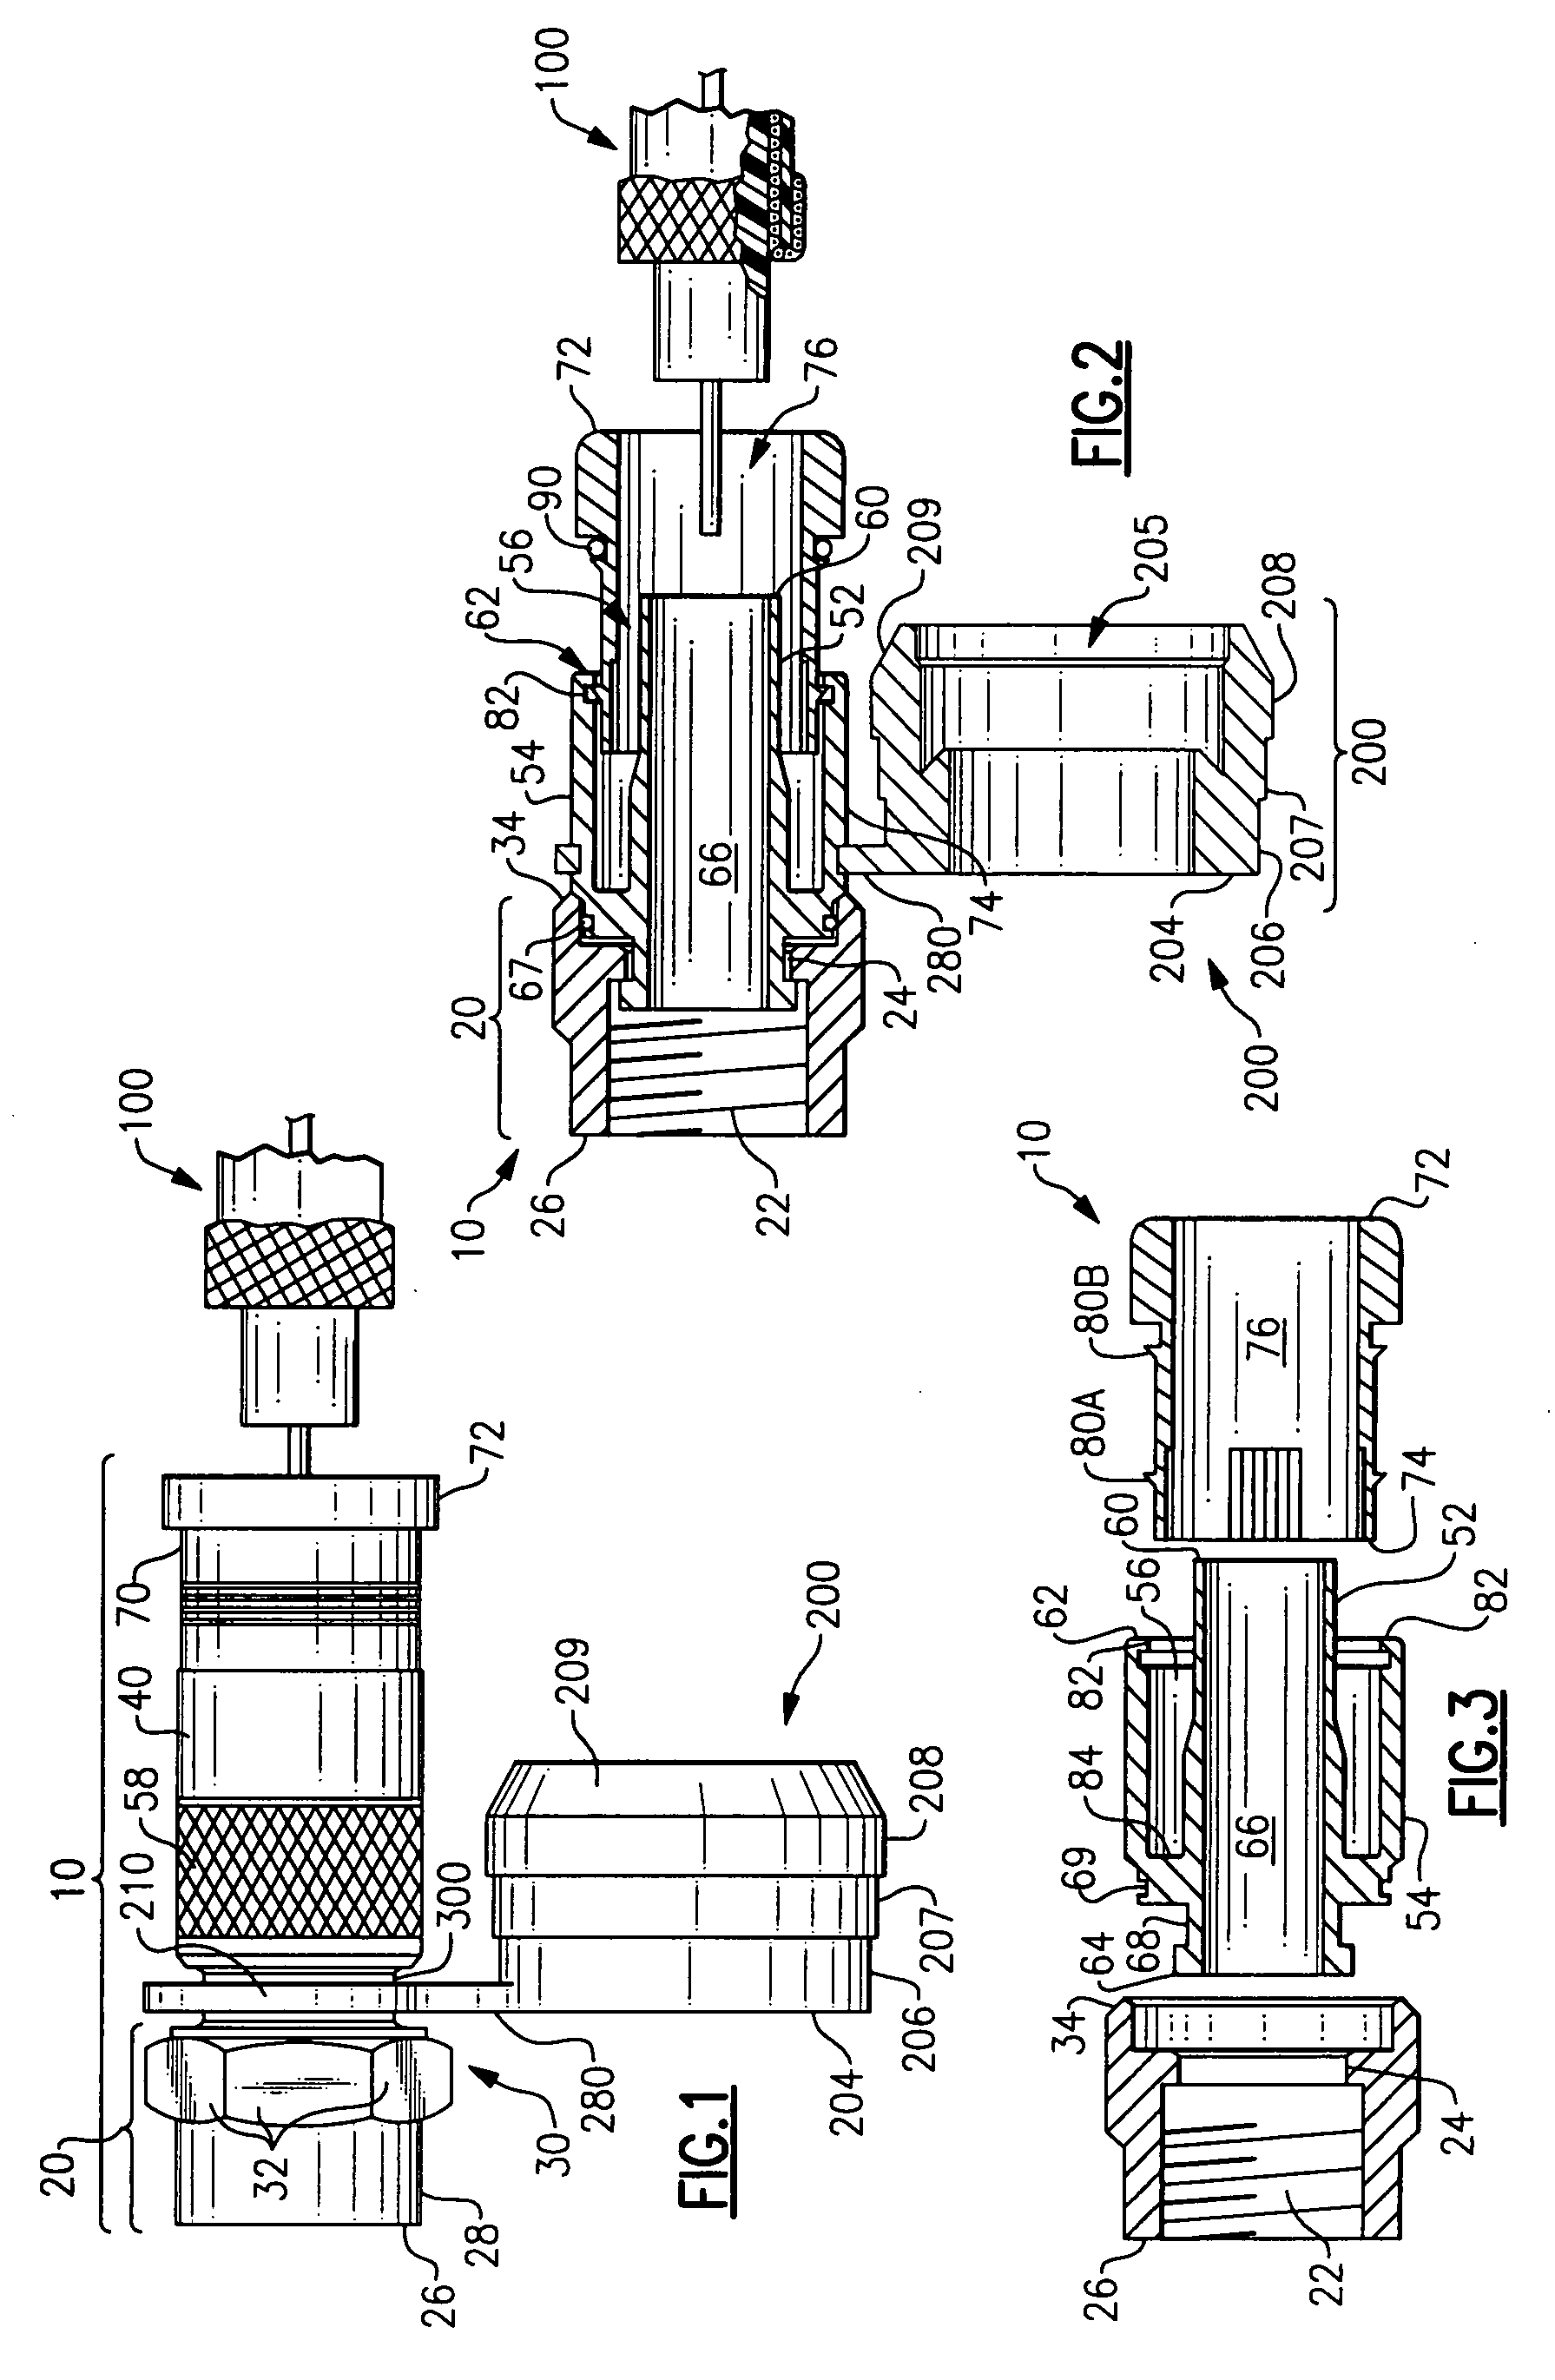 Compact compression connector with attached moisture seal